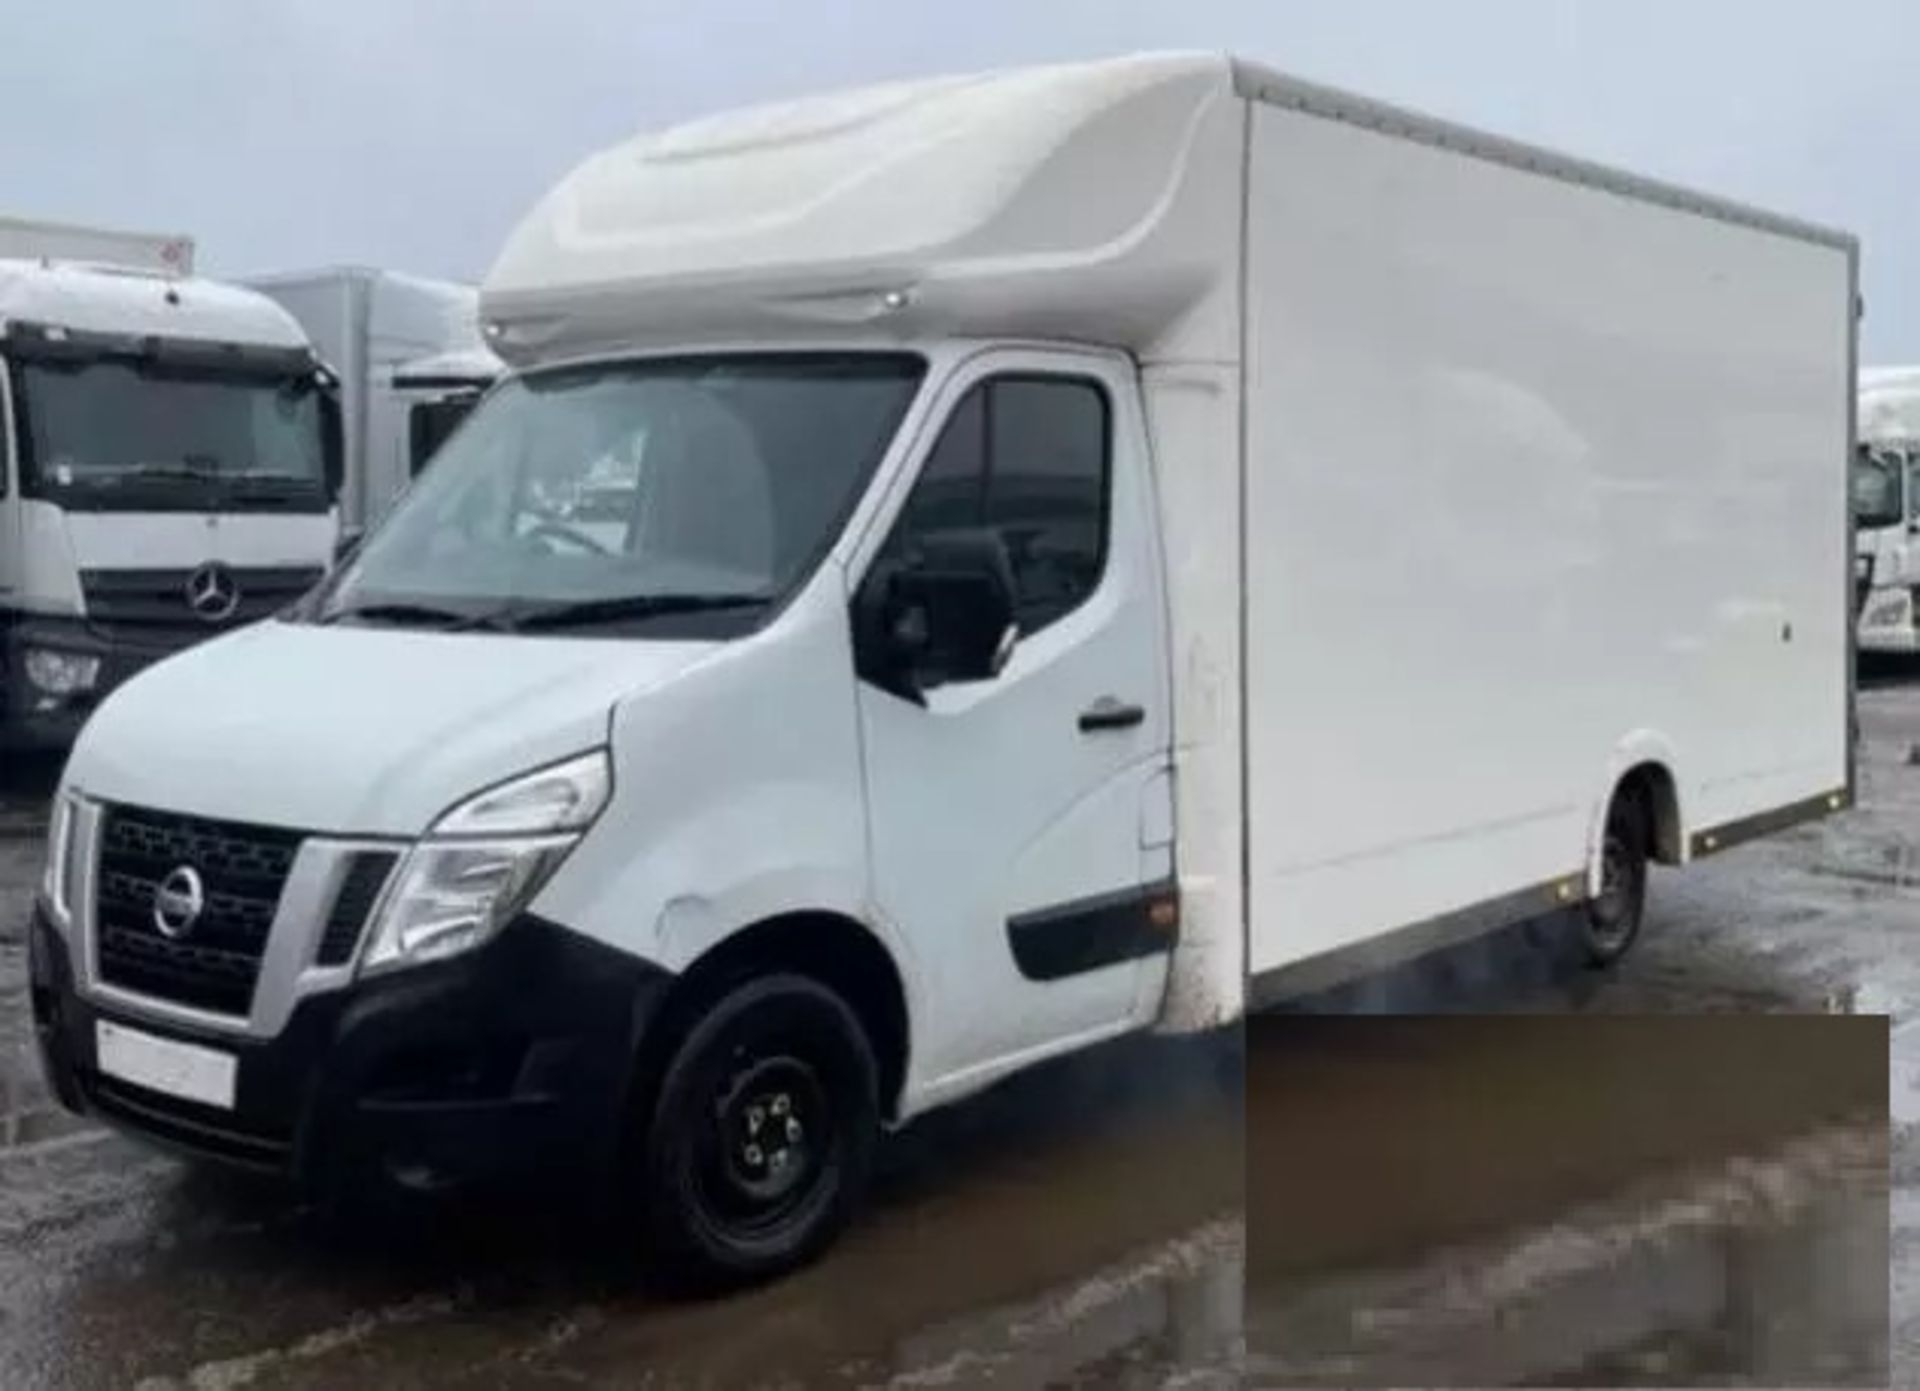 RELIABLE 2016 NISSAN NV400 LOW LOADER BOX - EURO 6 ULEZ & CAZ COMPLIANT! - Image 13 of 14